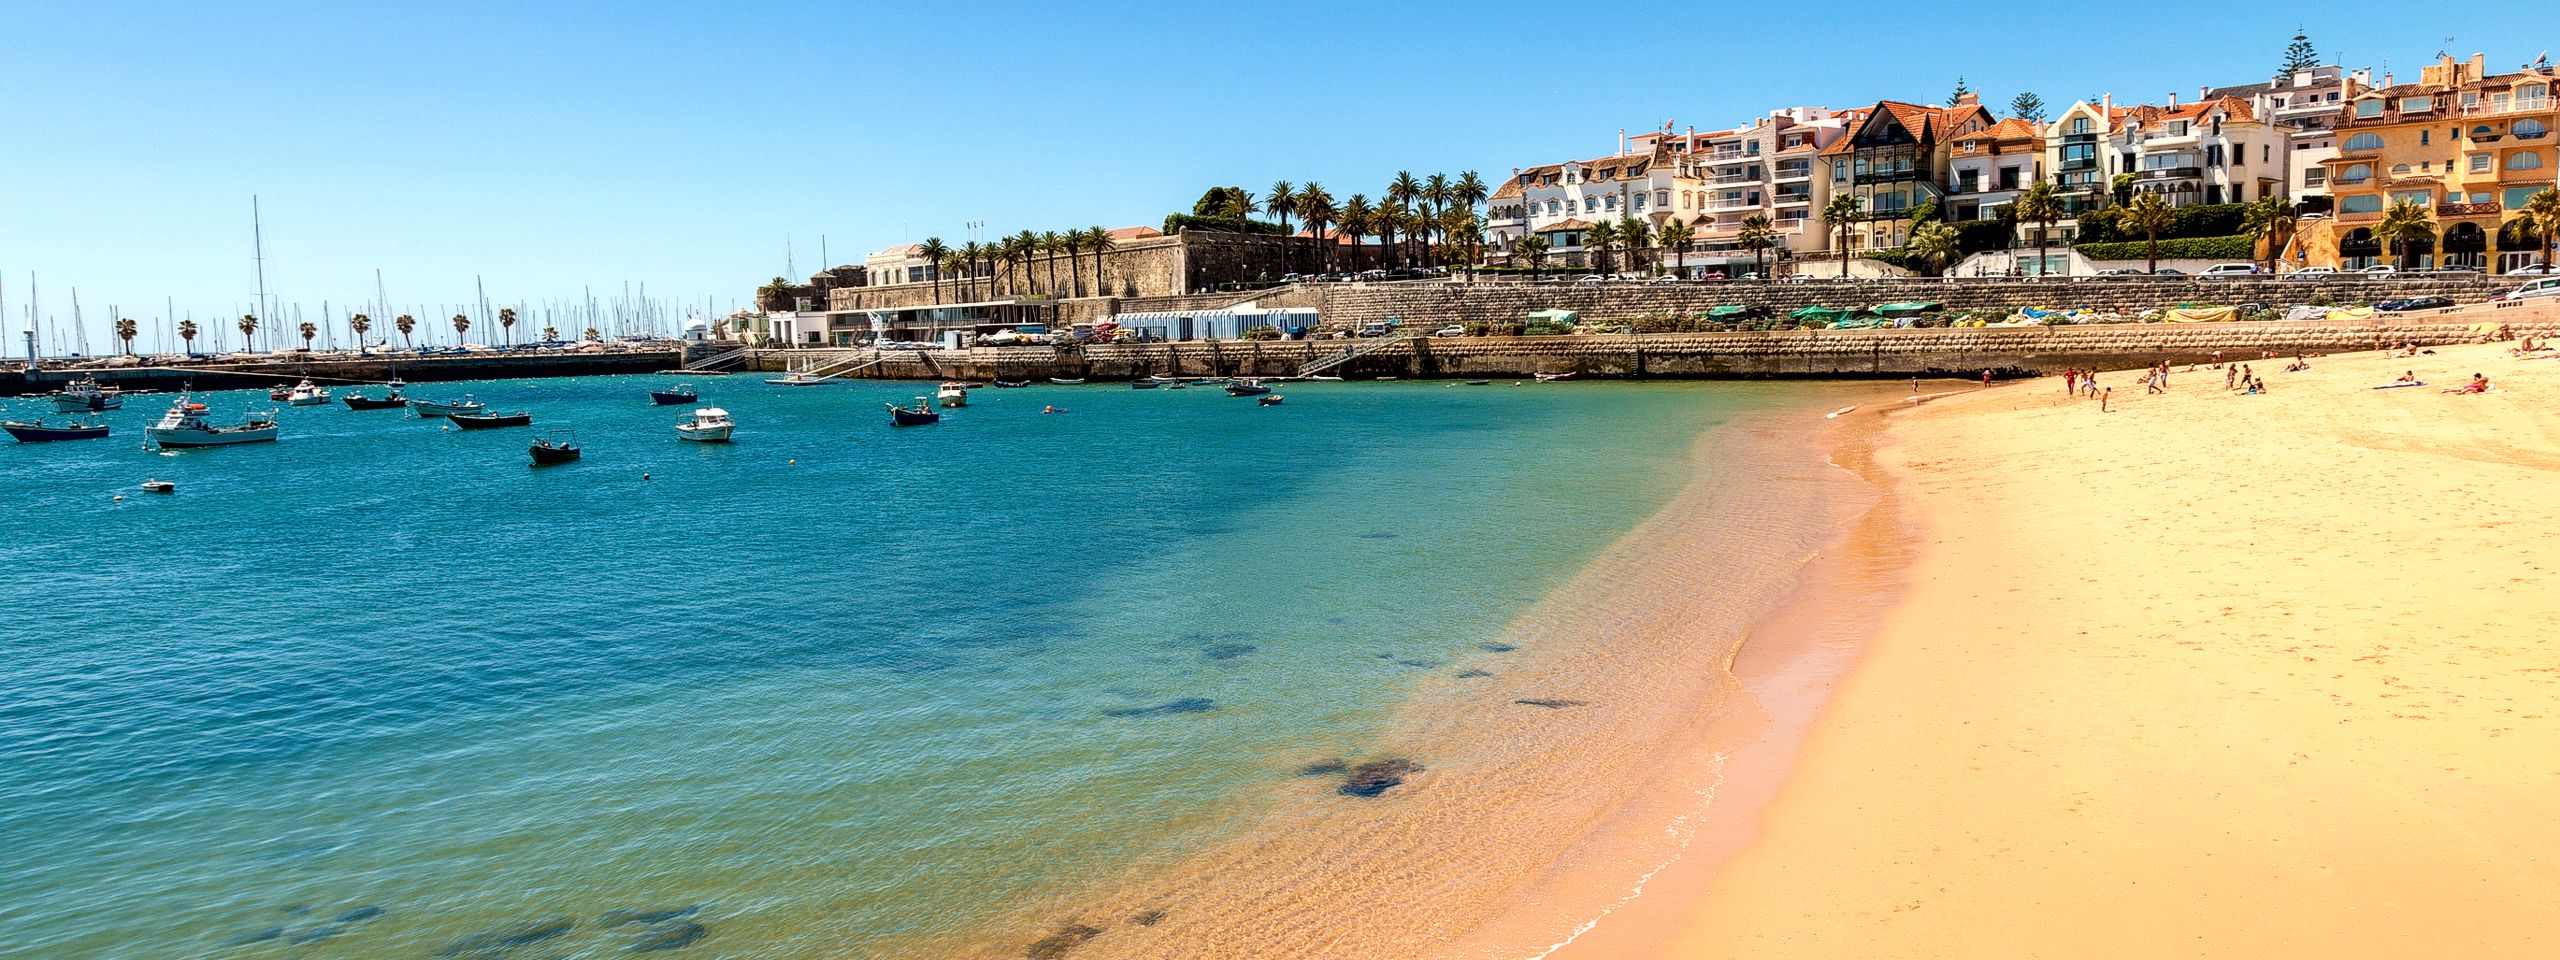 Santo Amaro Beach with the Oeiras Marina in the left background, Portugal